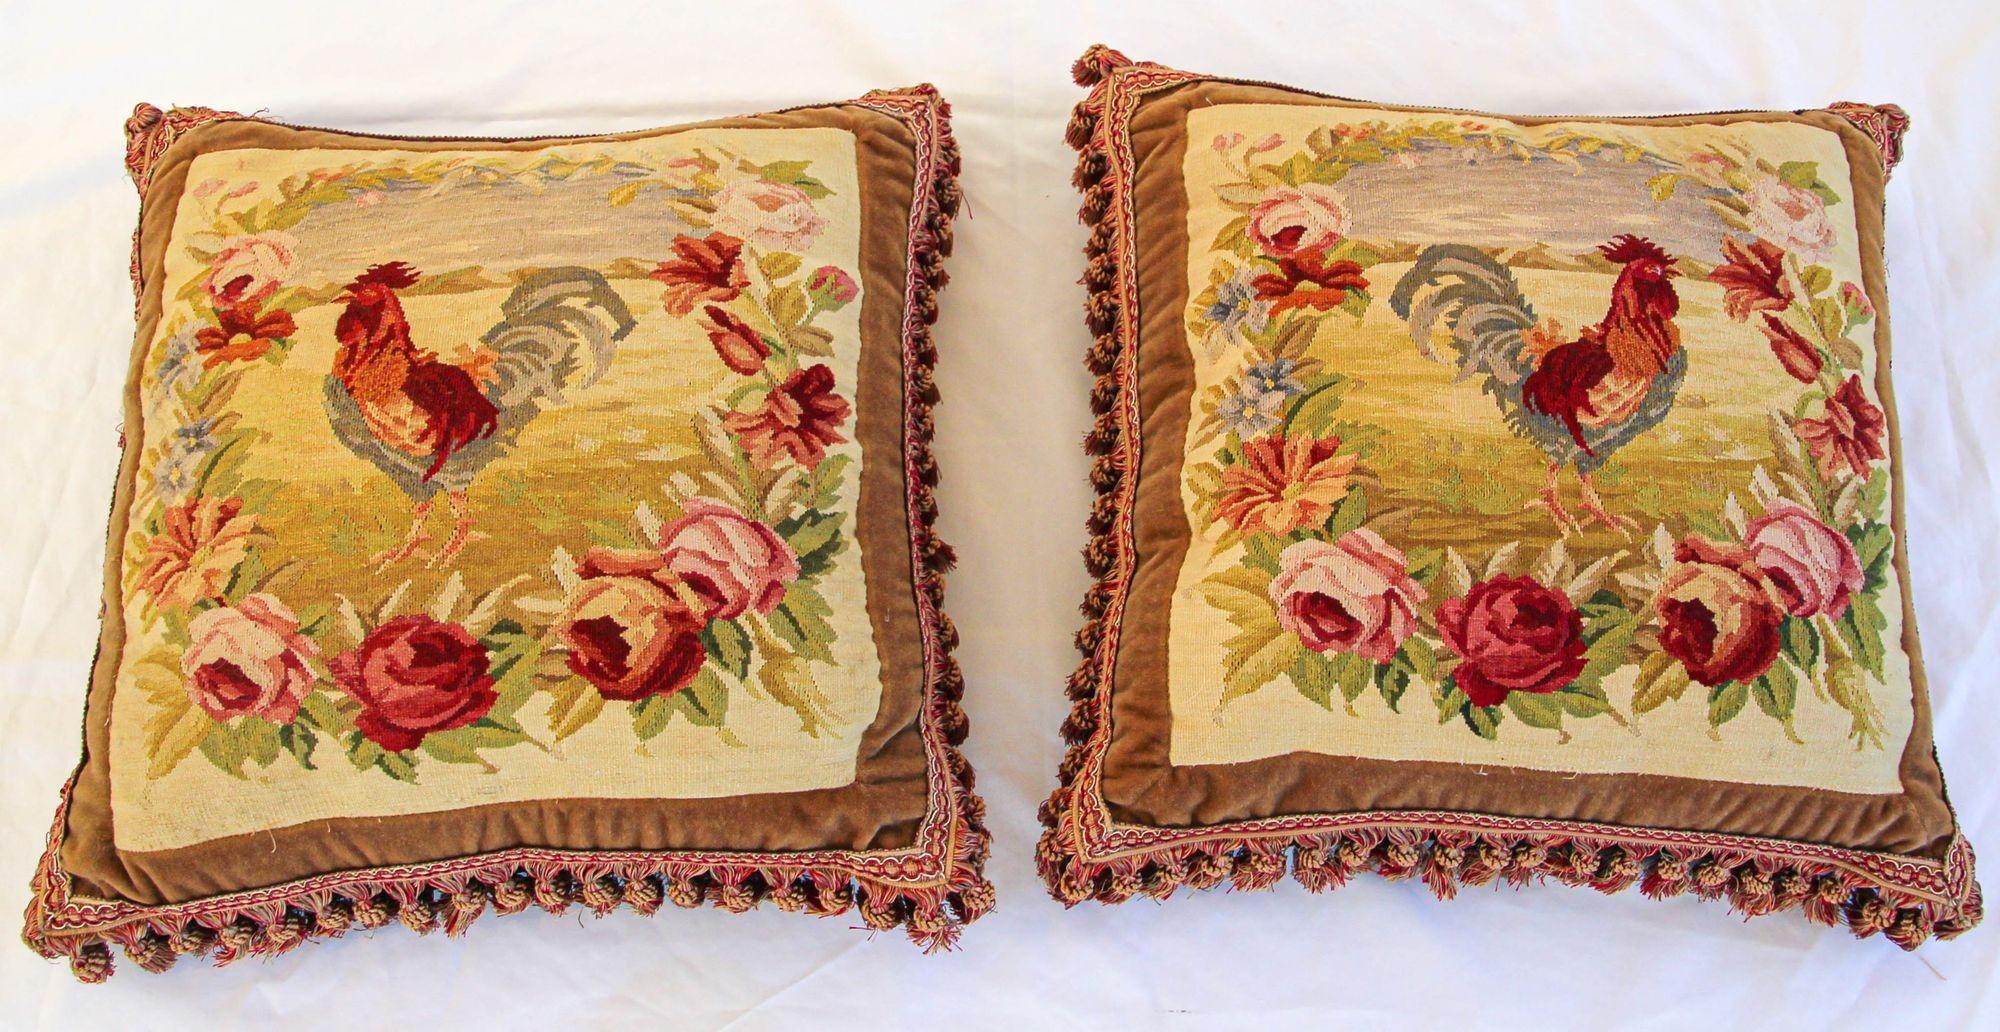 Antique Aubusson Tapestry Pillows with Rooster and Roses French Provincial 6